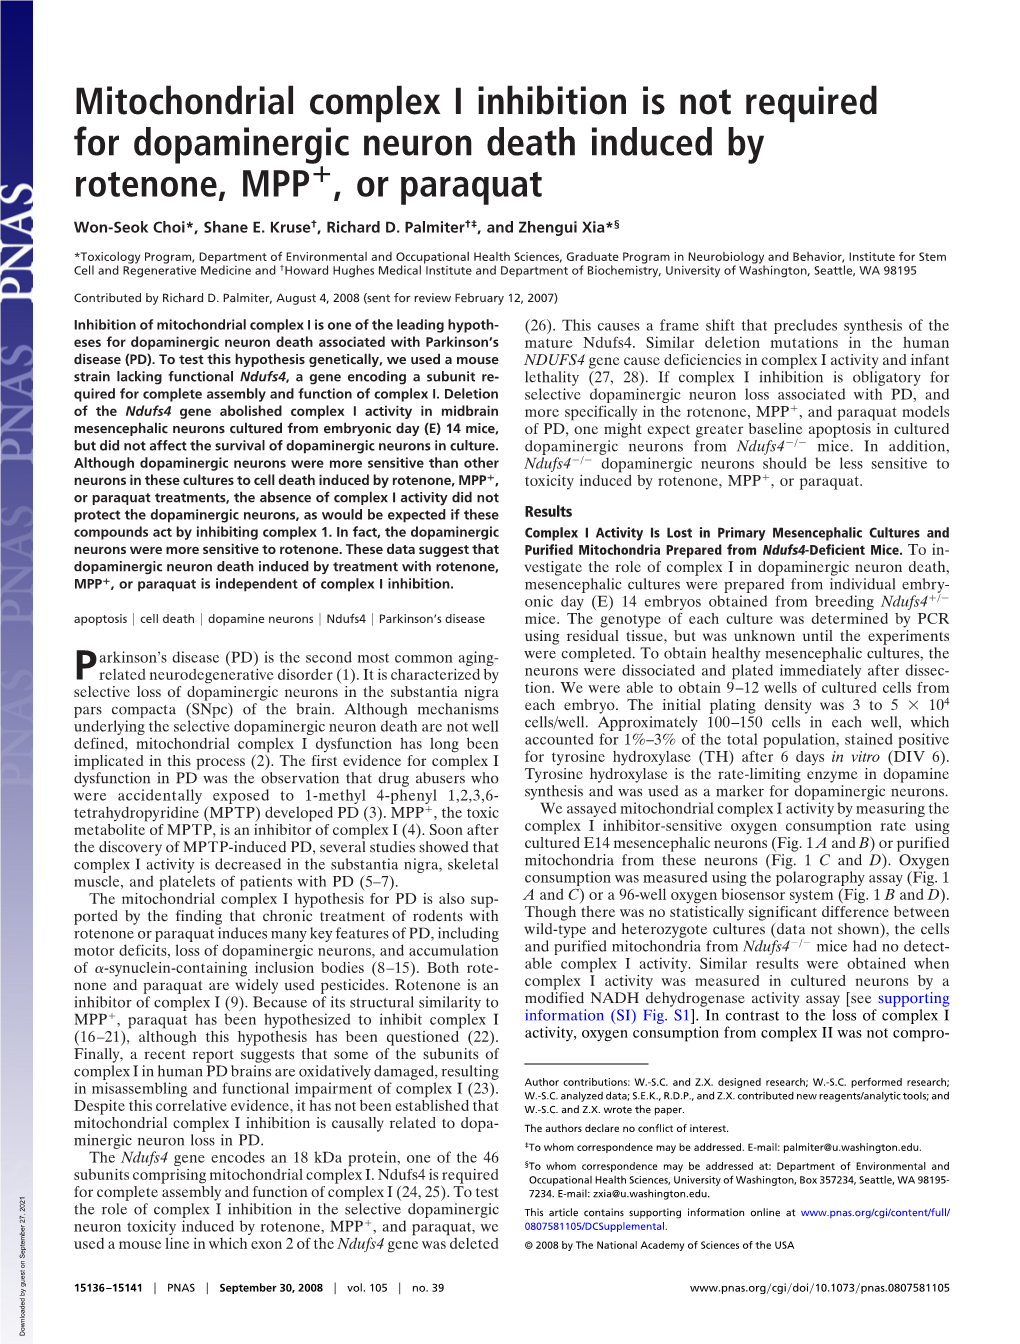 Mitochondrial Complex I Inhibition Is Not Required for Dopaminergic Neuron Death Induced by Rotenone, MPP؉, Or Paraquat